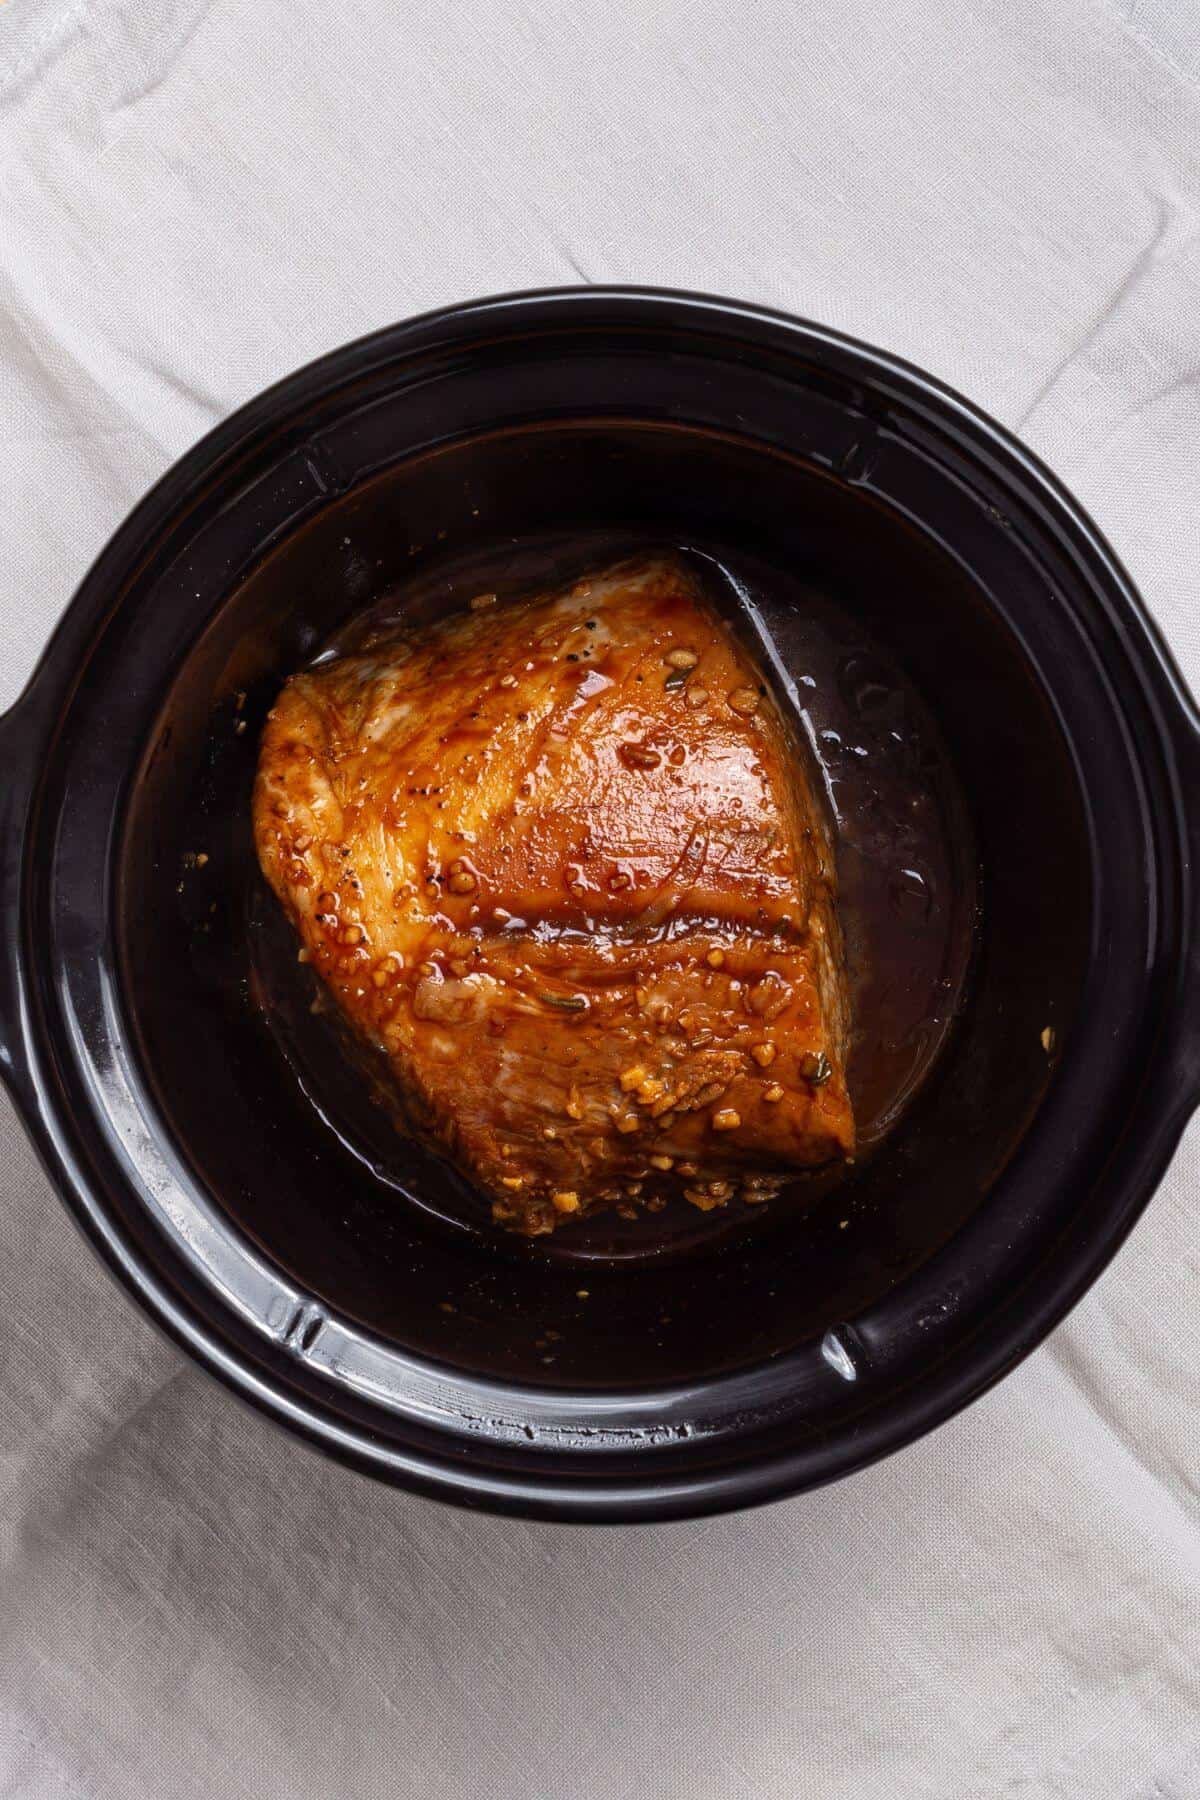 A crock pot with a piece of cooked pork loin in it.